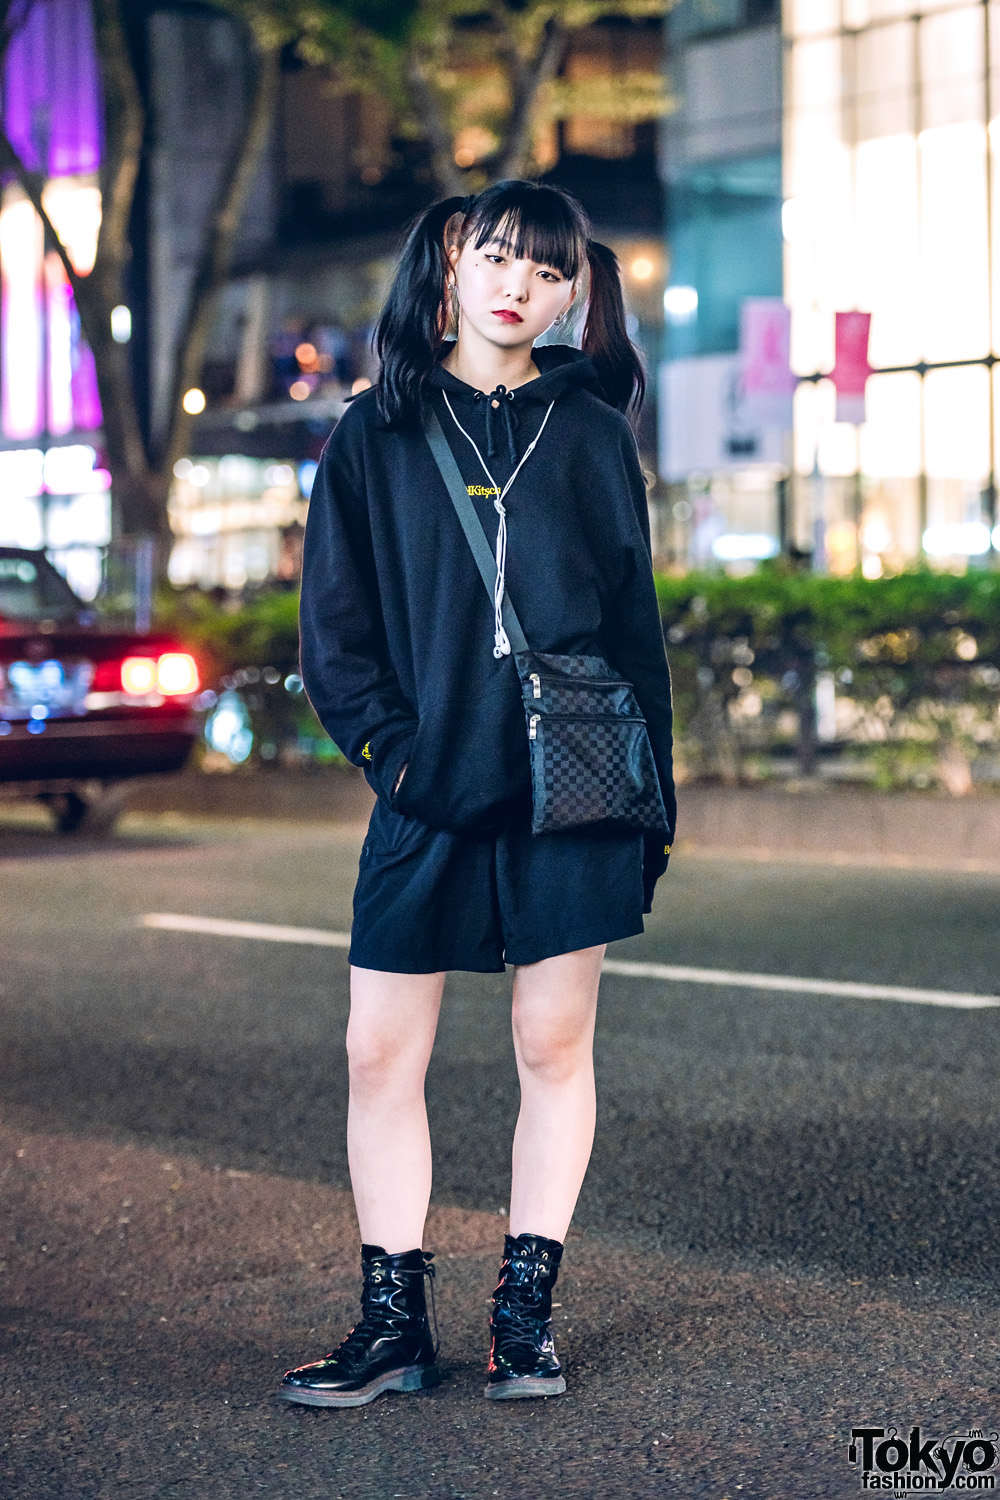 All Black Minimalist Streetwear Style in Harajuku w/ Twin Tails, Kitsch Hoodie Sweater, Shorts, Lace-Up Boots & Checkered Crossbody Bag